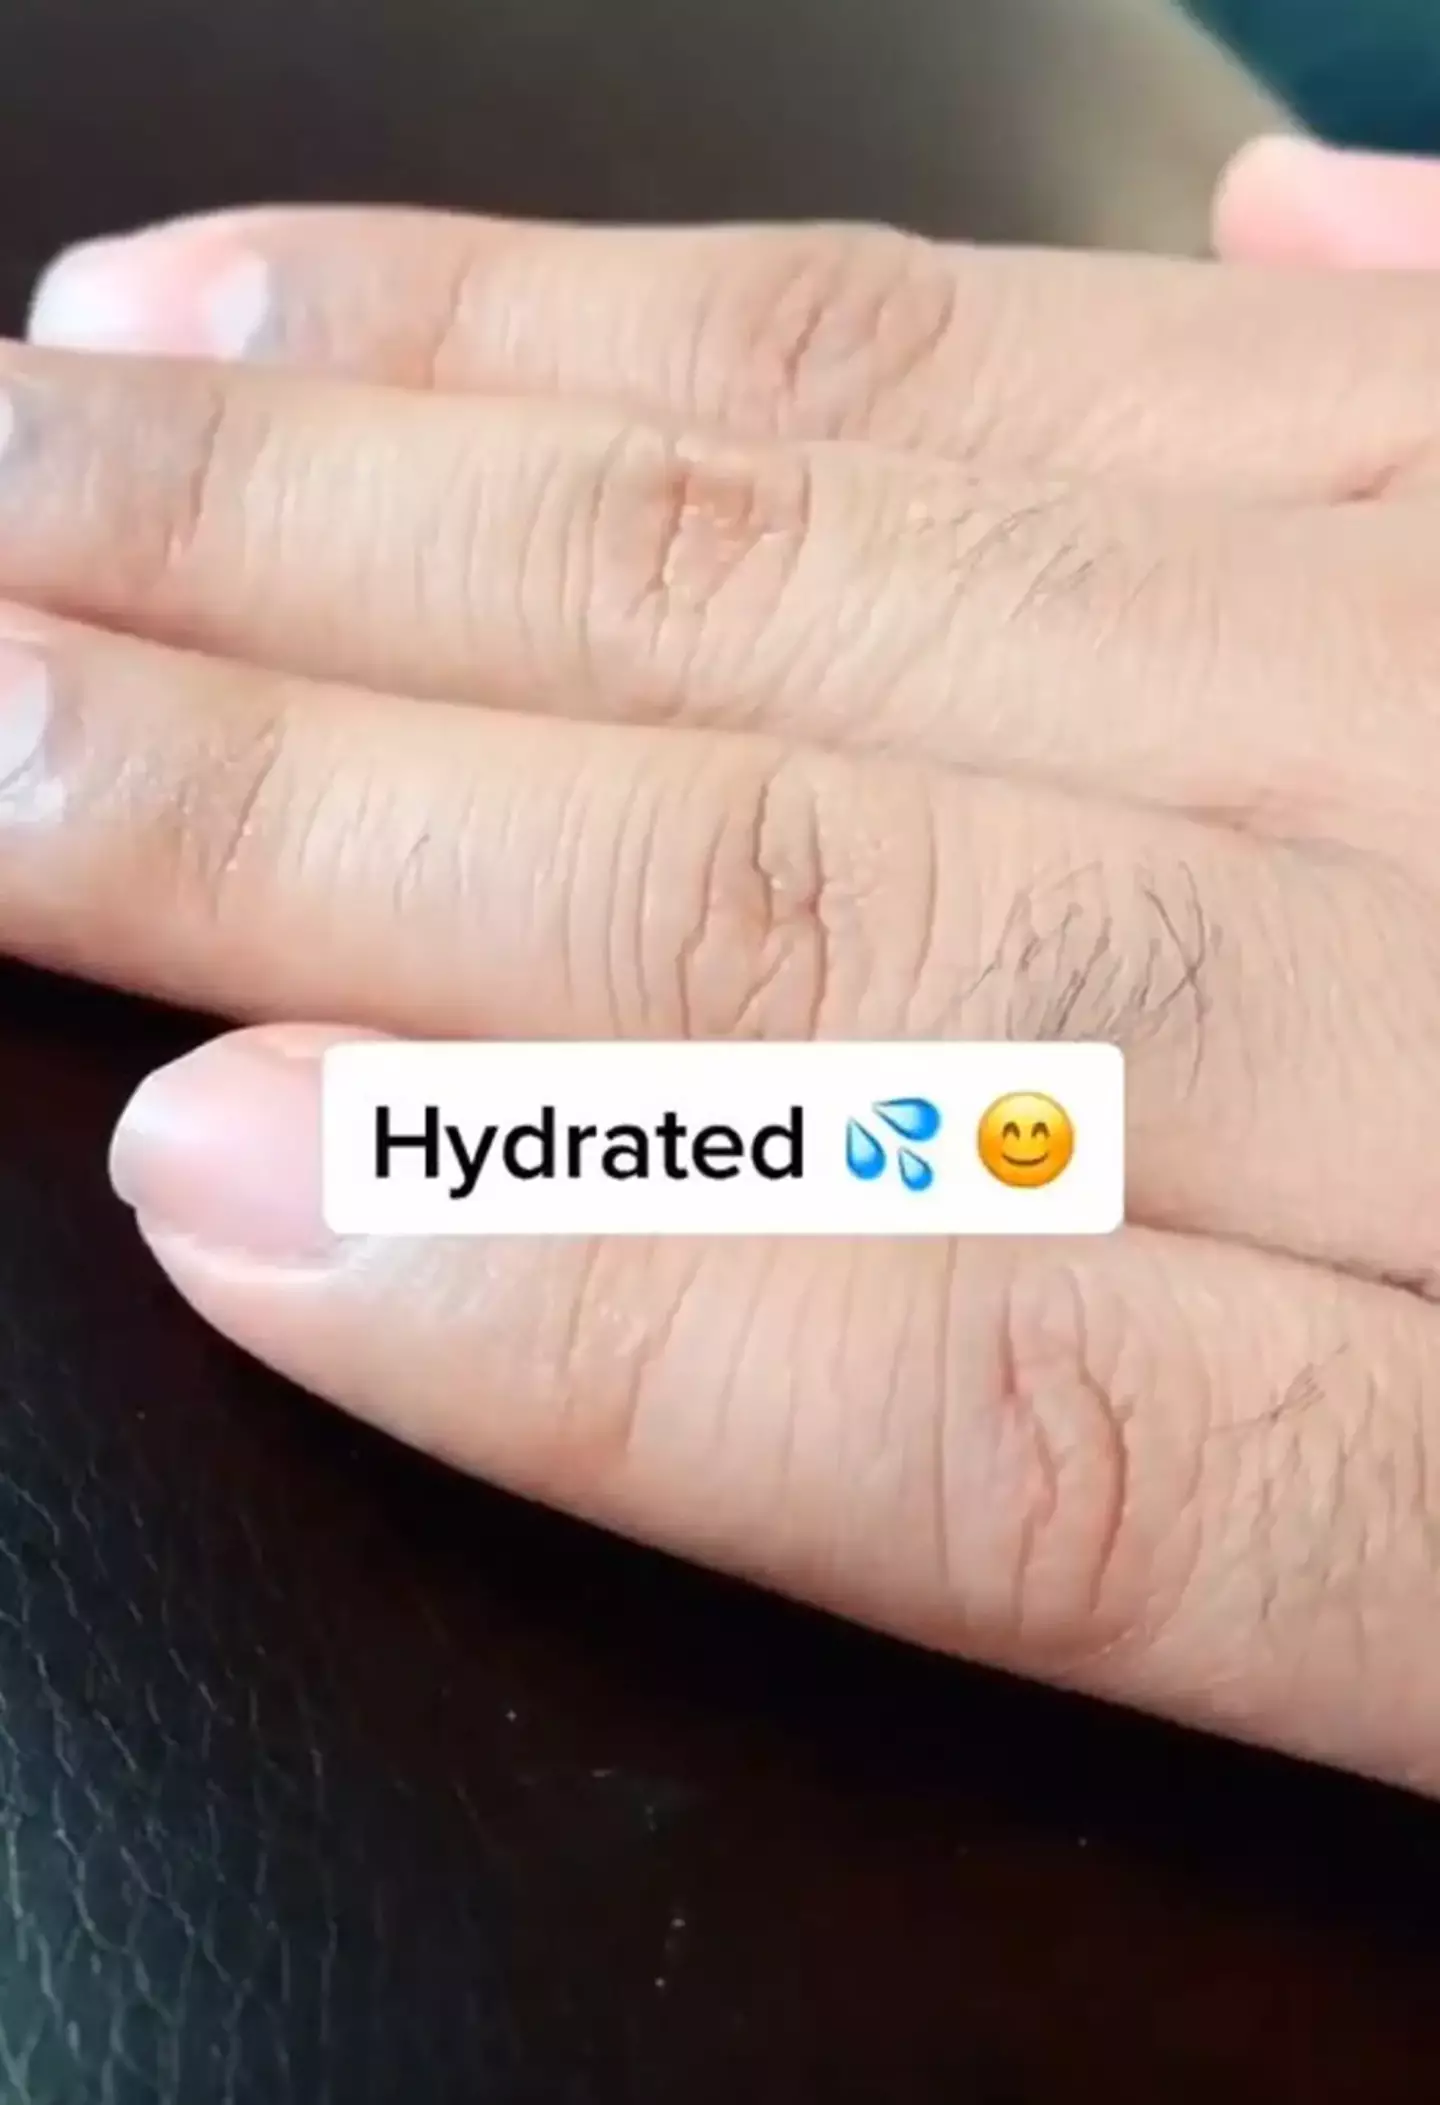 A hydrated hand.